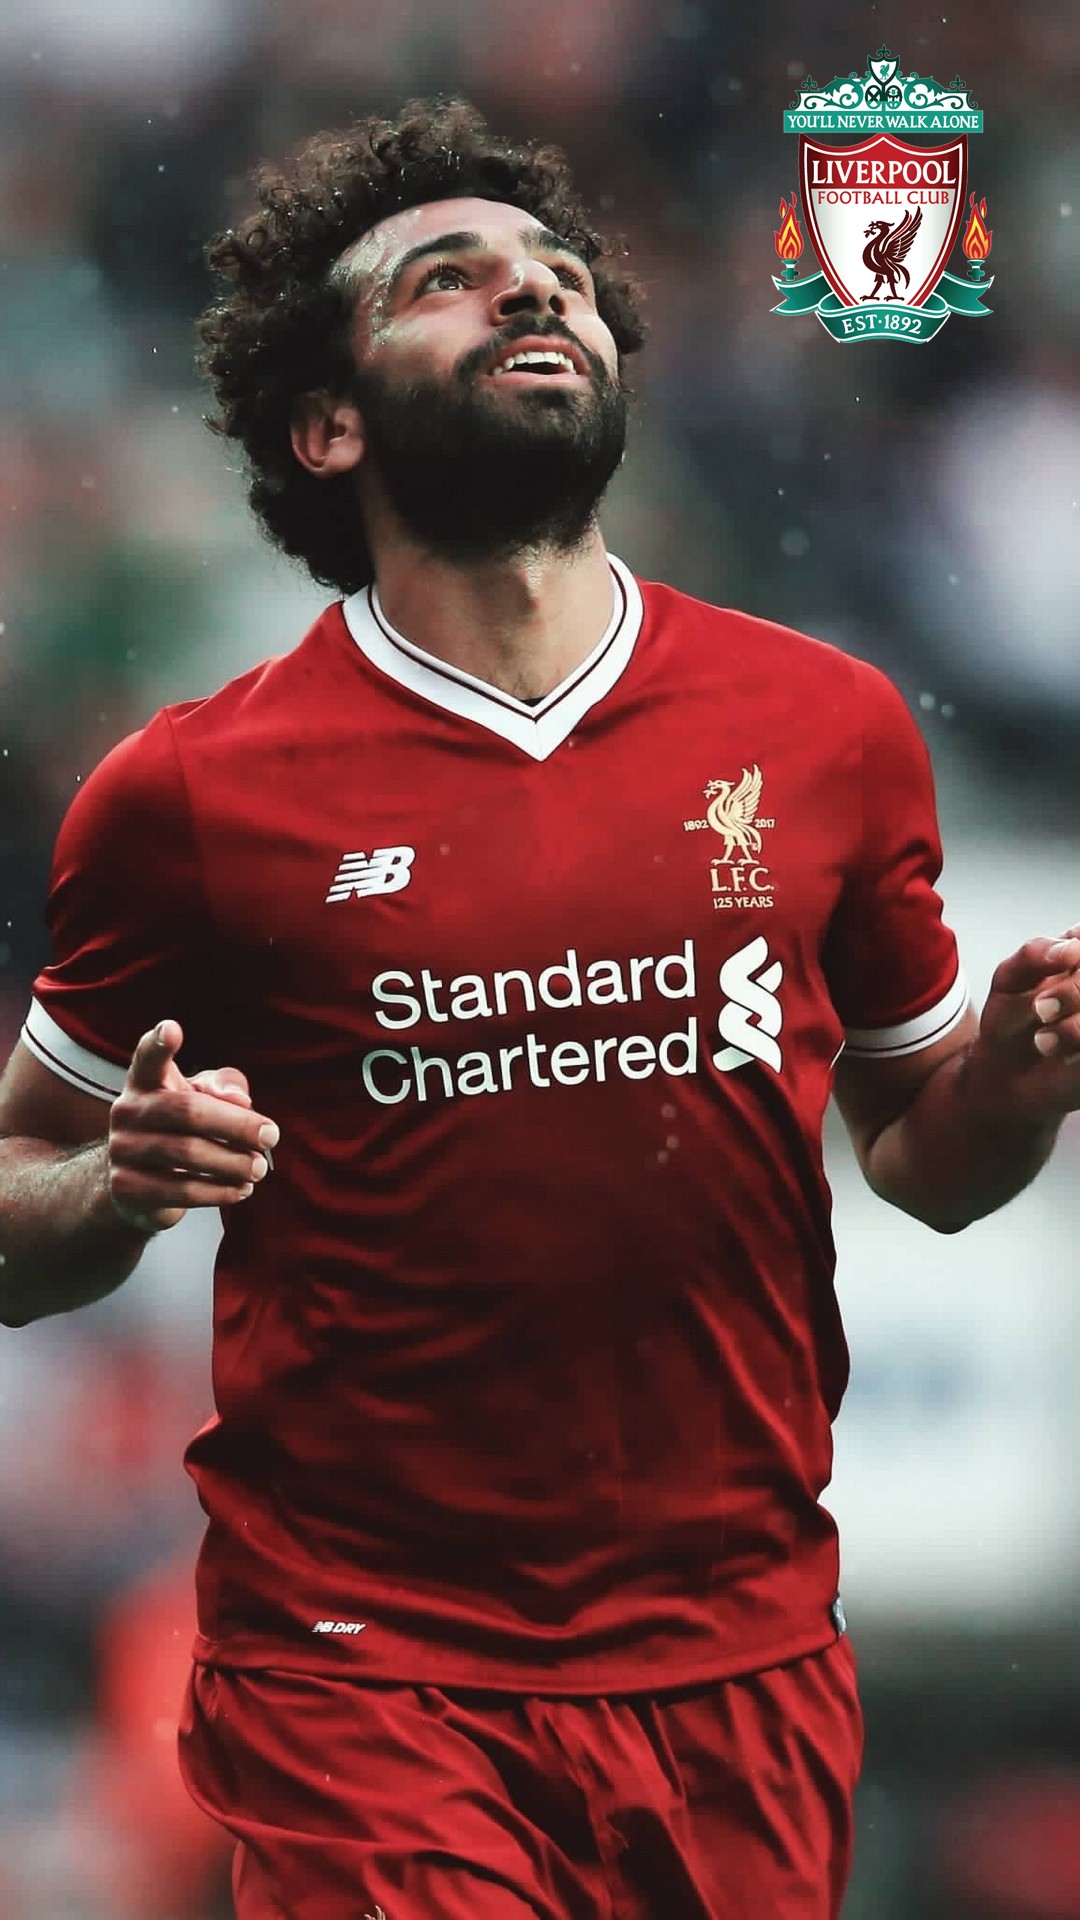 Mohamed Salah Liverpool Wallpaper iPhone with image resolution 1080x1920 pixel. You can make this wallpaper for your iPhone 5, 6, 7, 8, X backgrounds, Mobile Screensaver, or iPad Lock Screen